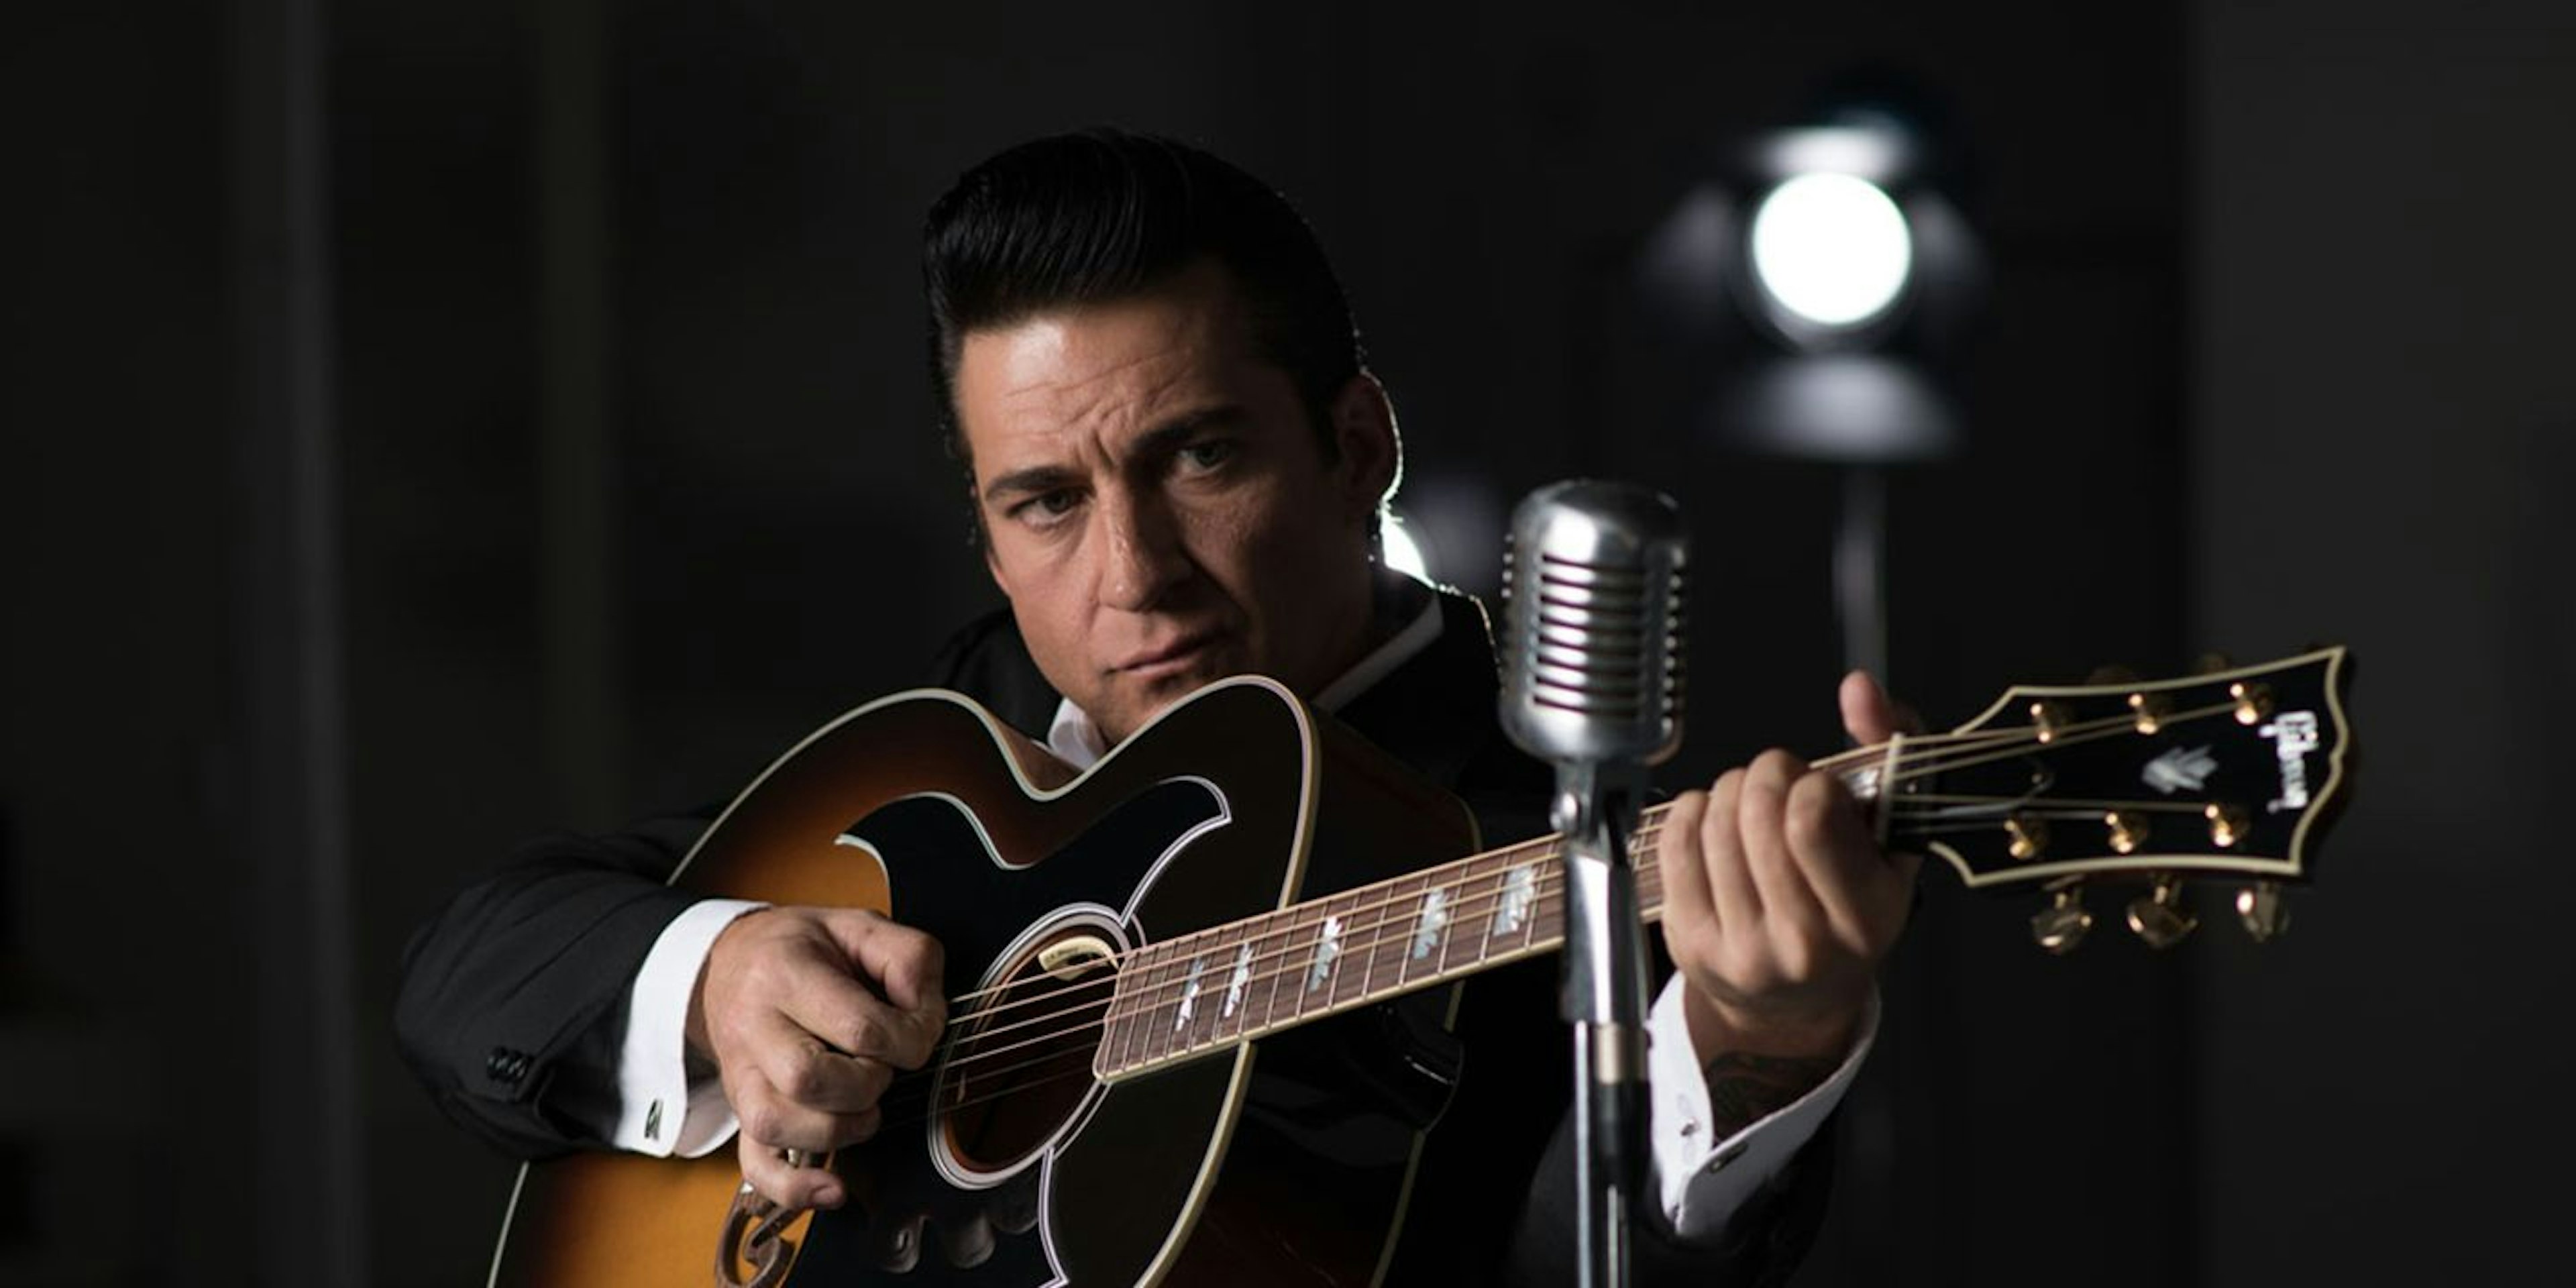 Man in Black – A Tribute to Johnny Cash